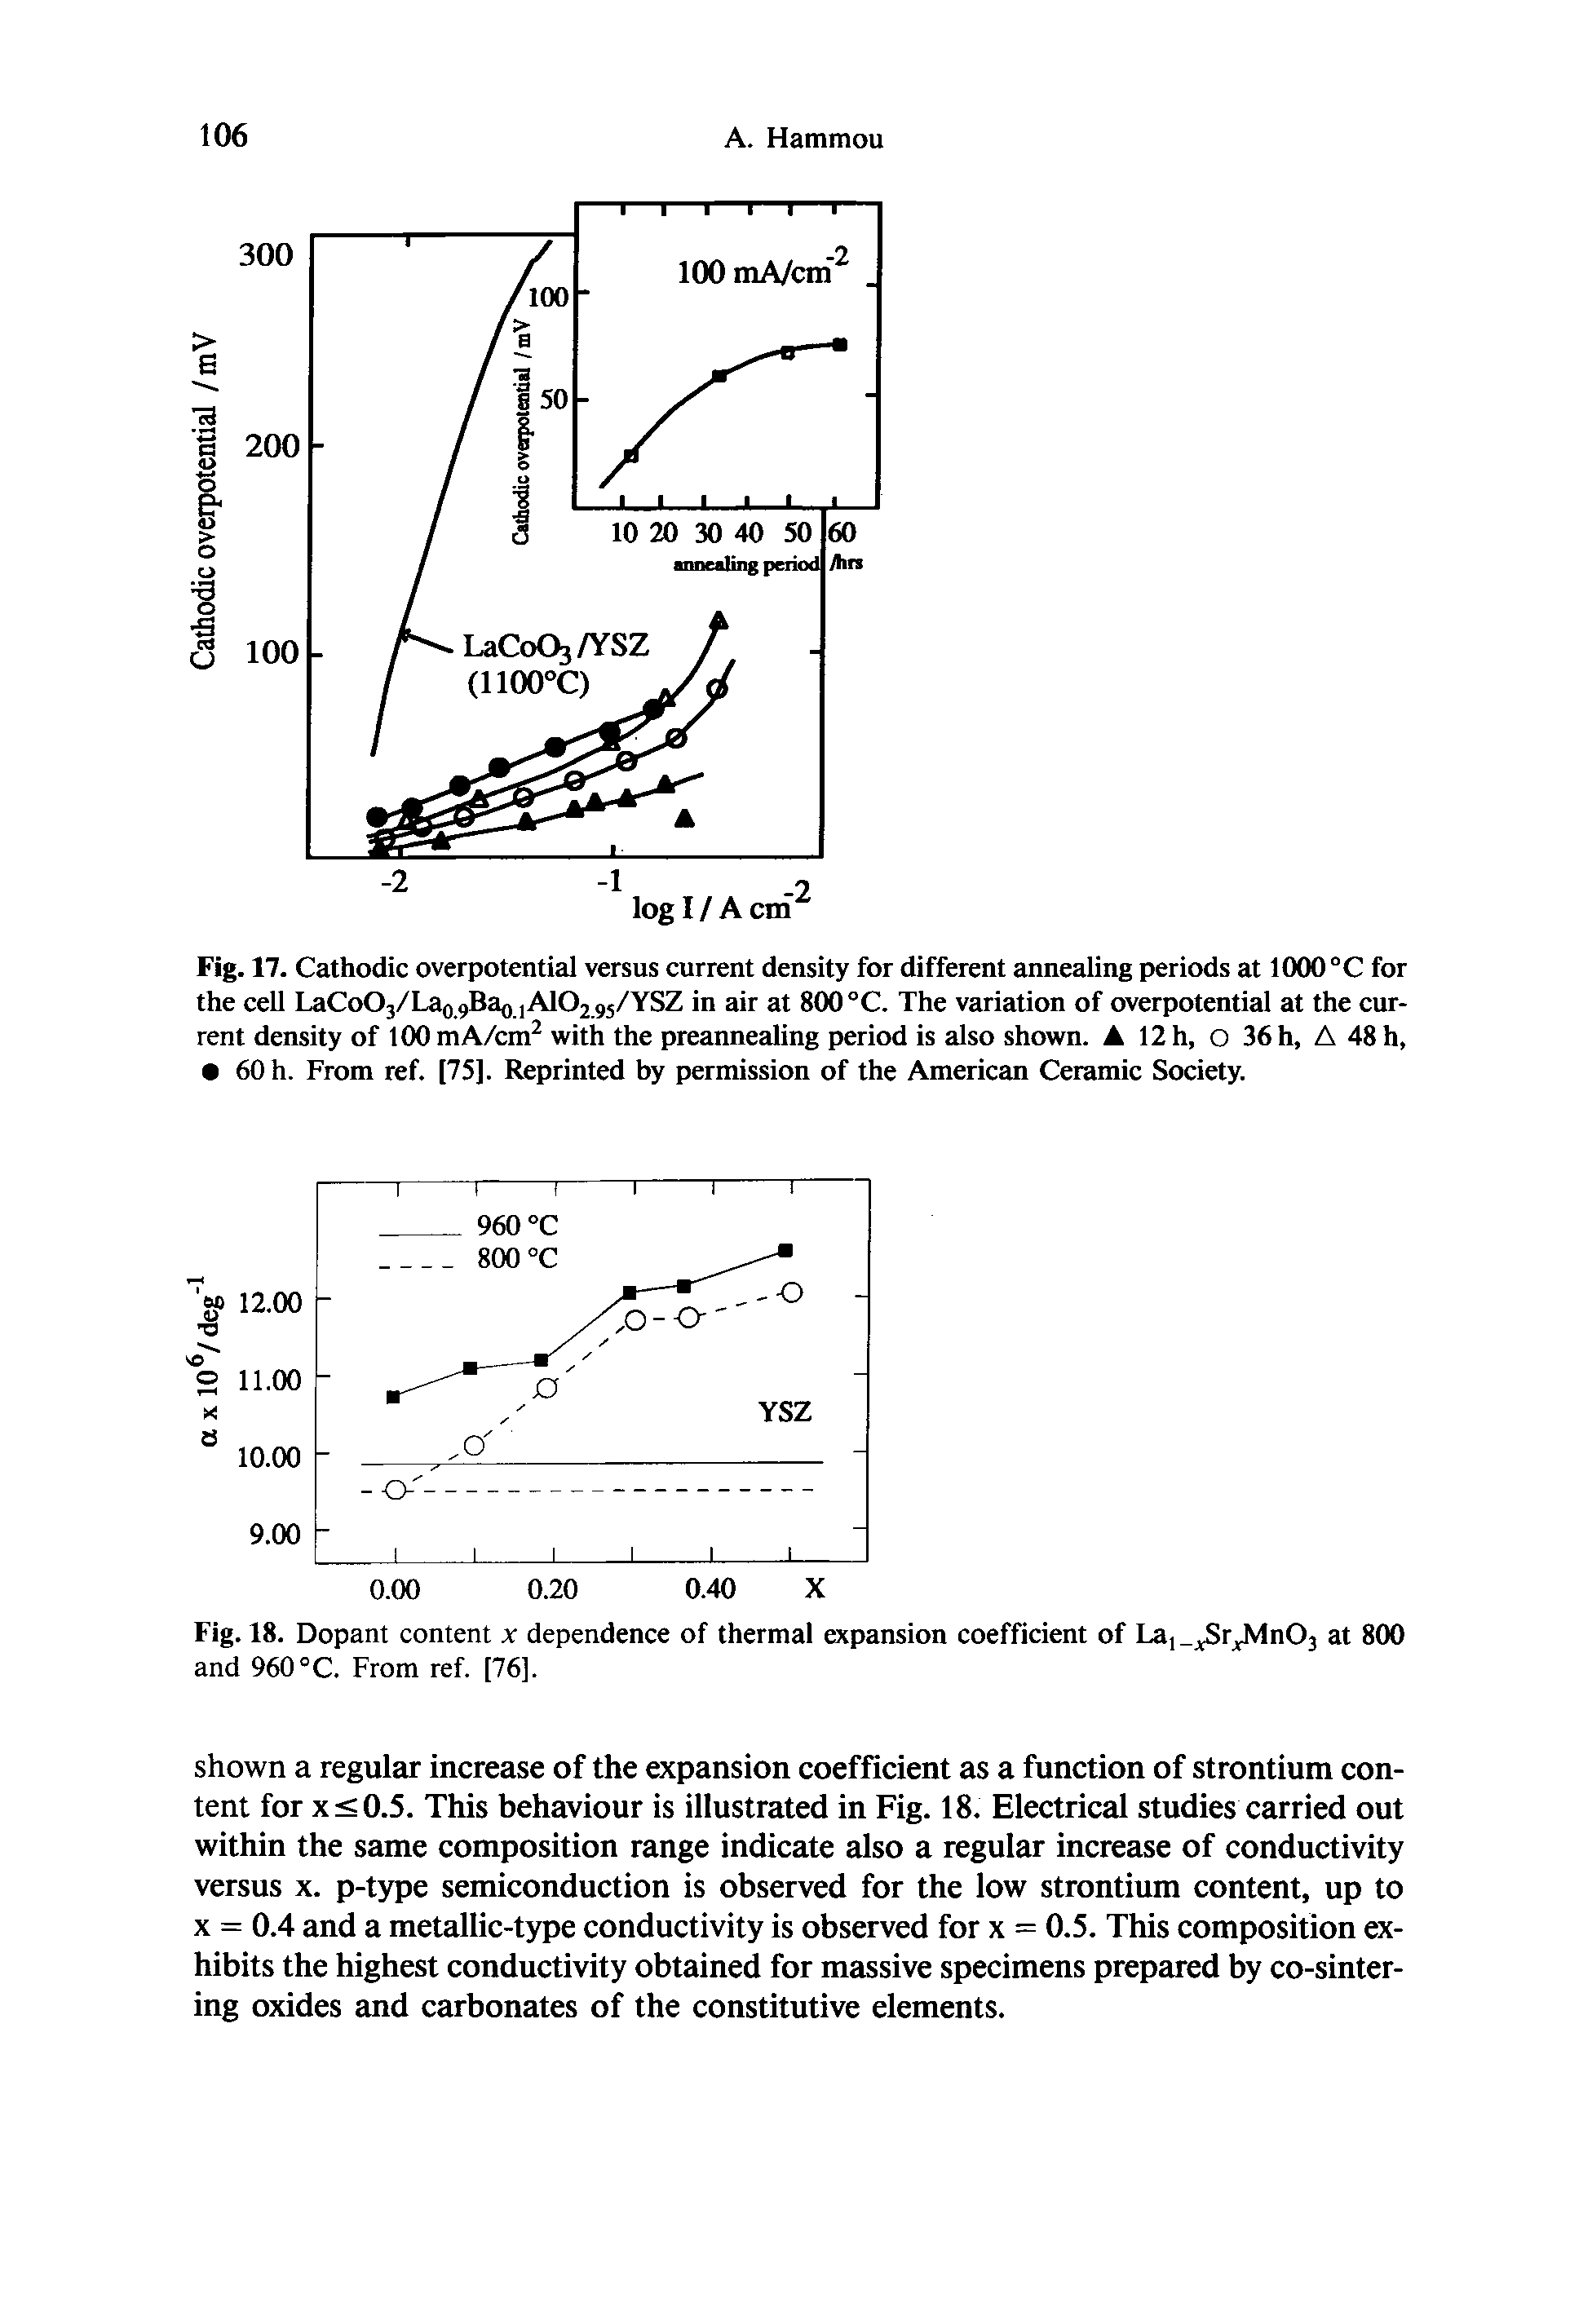 Fig. 18. Dopant content x dependence of thermal expansion coefficient of La xSrxMn03 at 800 and 960 °C. From ref. [76],...